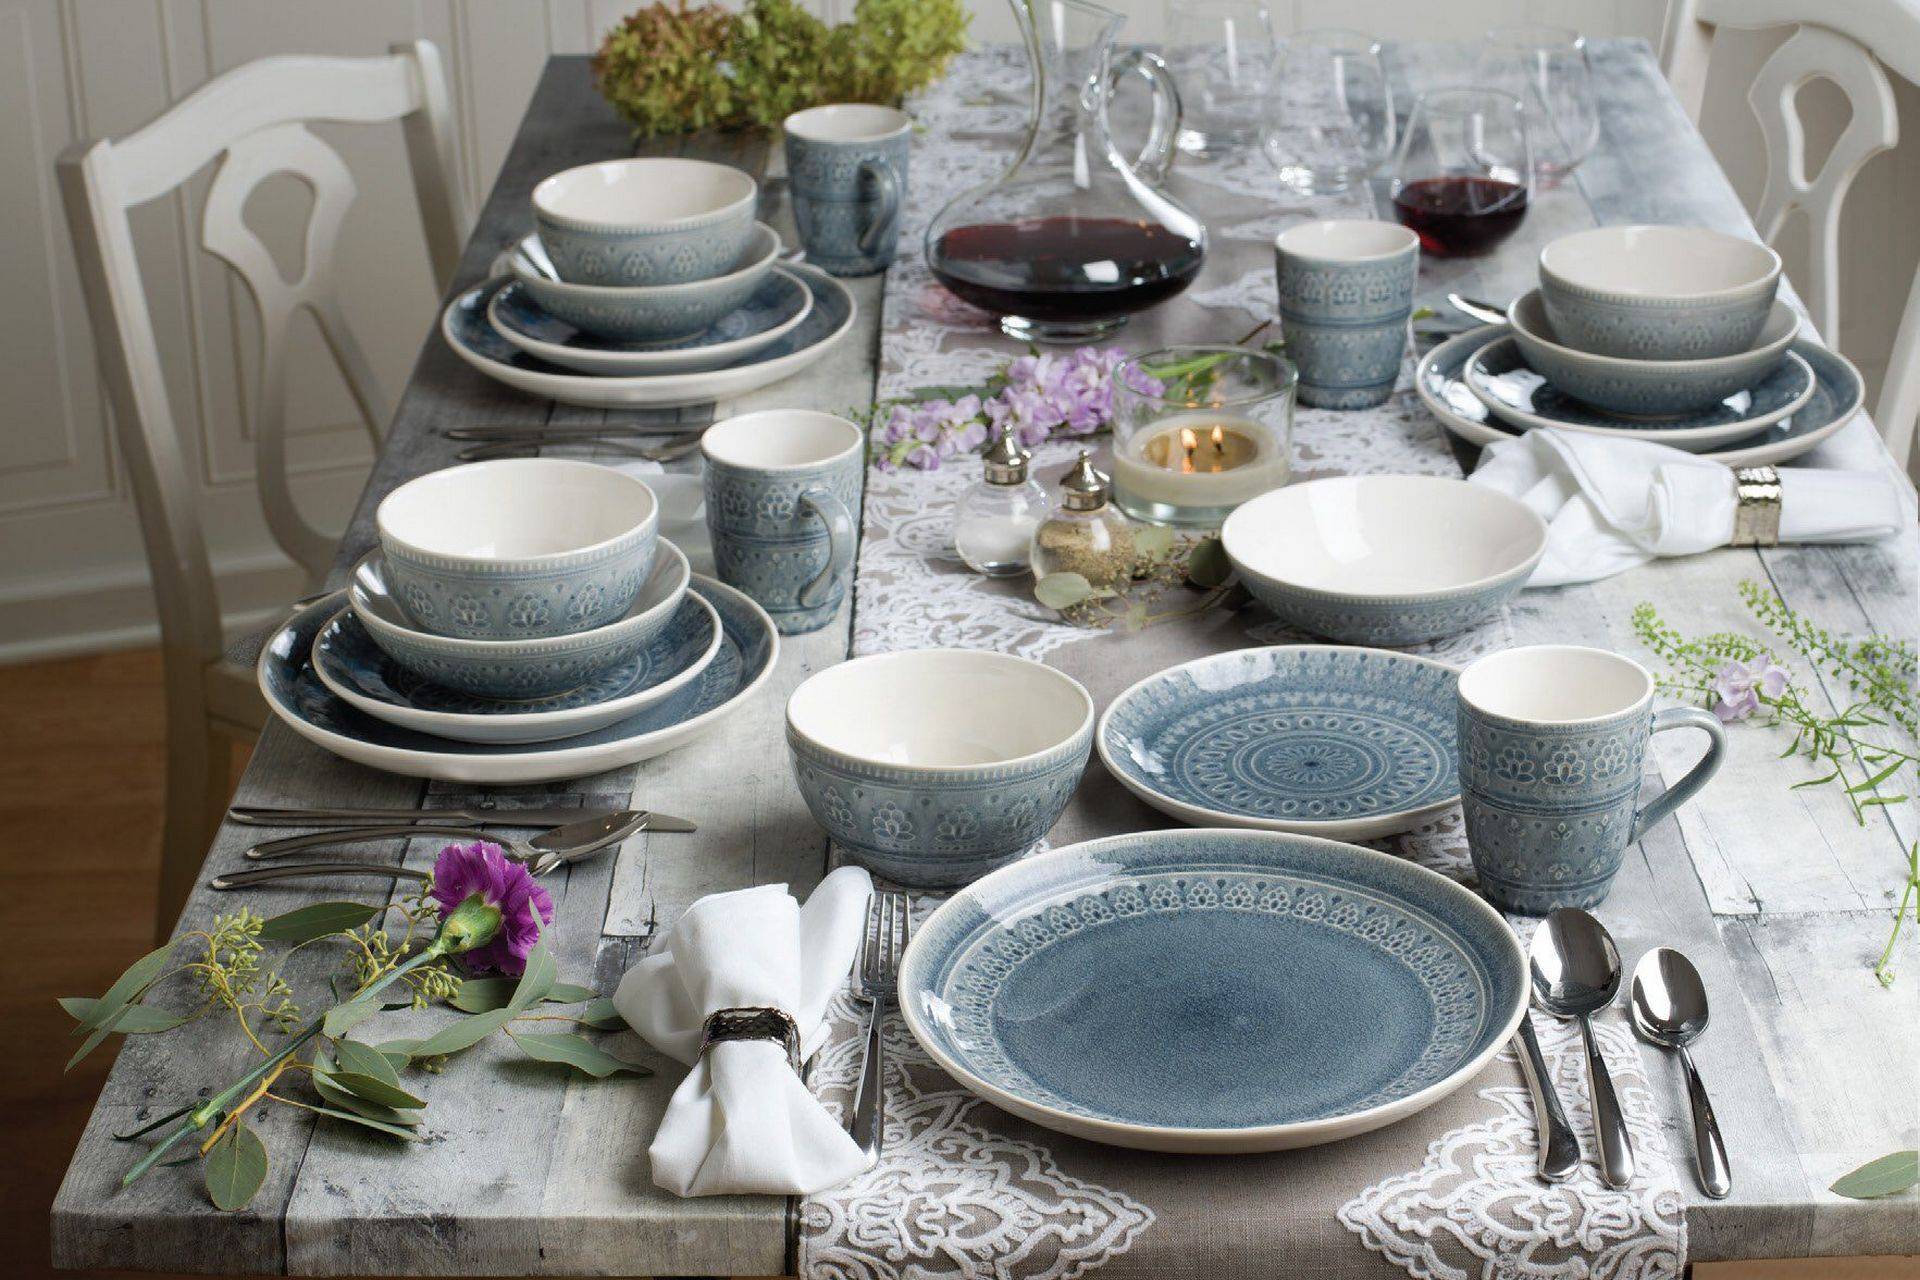 Price and buy porcelain sets dinnerware types + cheap sale